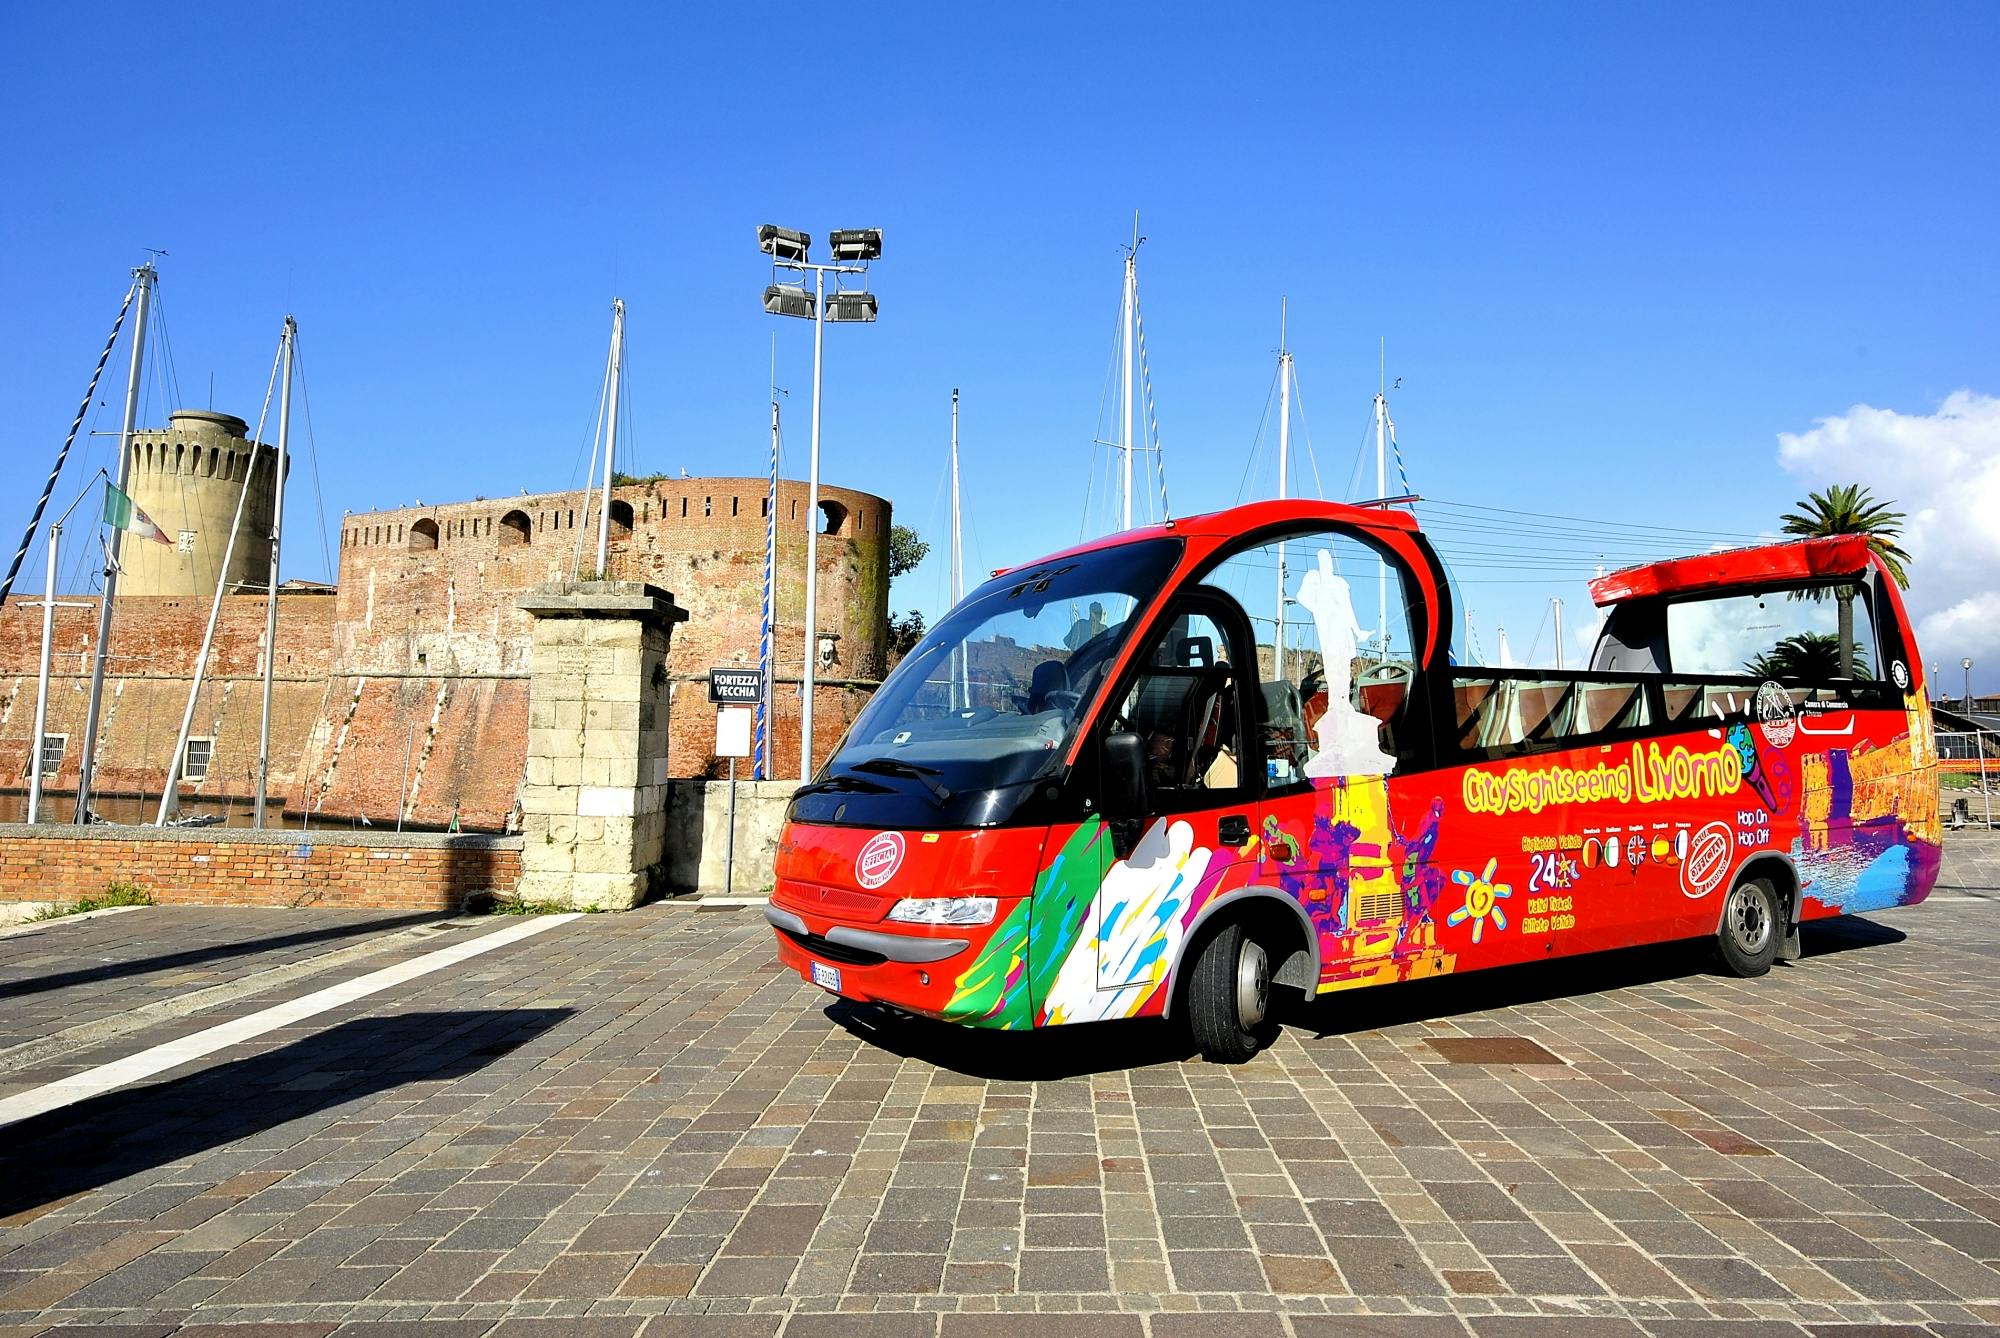 Livorno hop on off bus 24 hour tickets Musement